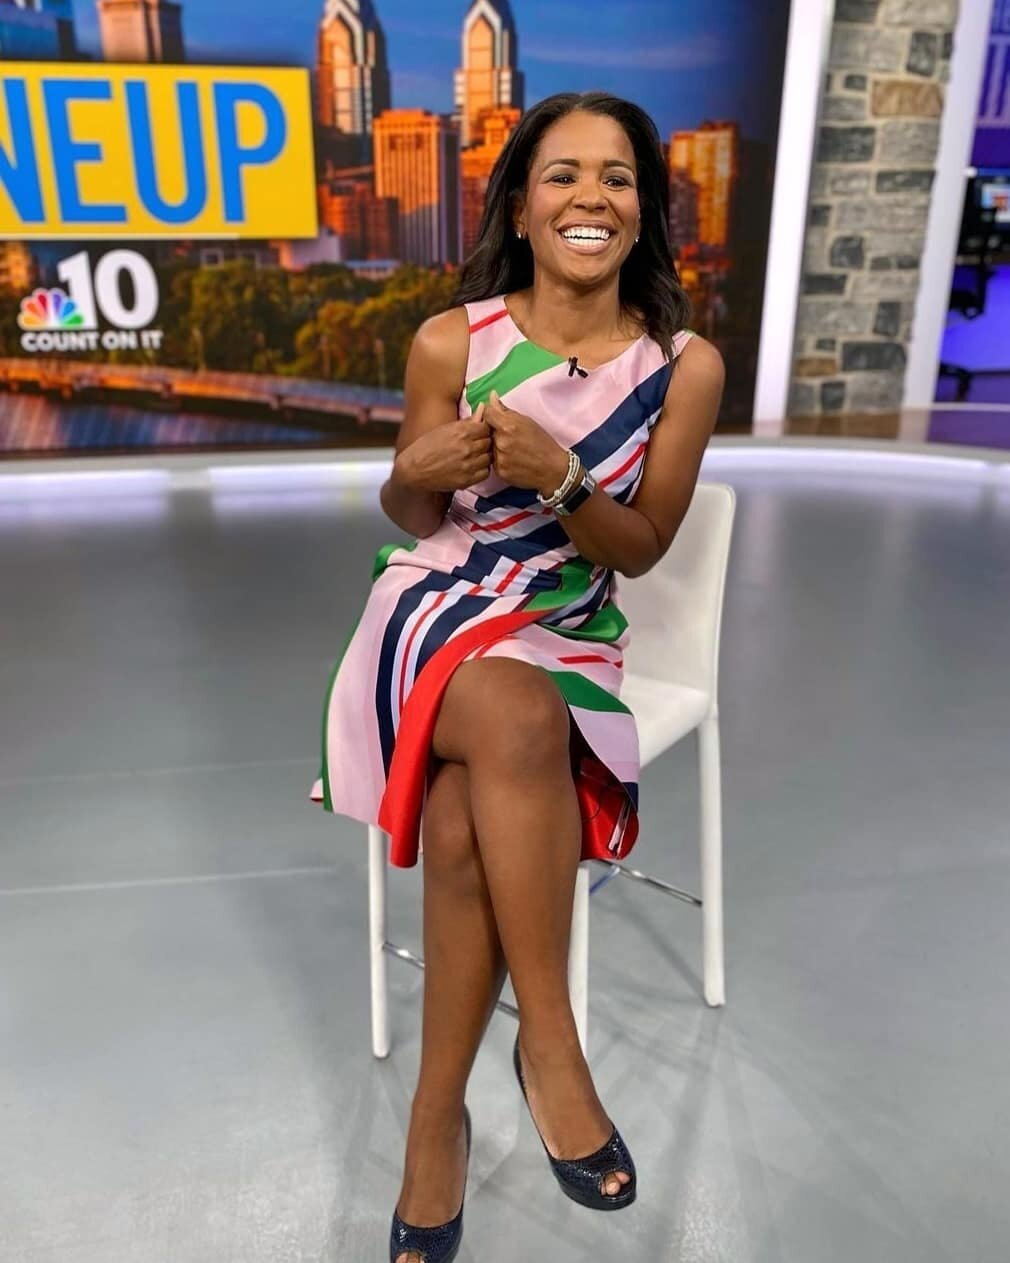 Happy Fourth Of July 🇺🇸
Erin C. from @nbcphiladelphia news in this cute &amp; playful asymmetrical Ted Baker dress 😀
.
.
.
.
.
✂Alterations📍 

👗
▪︎take in side seams
▪︎take in armholes